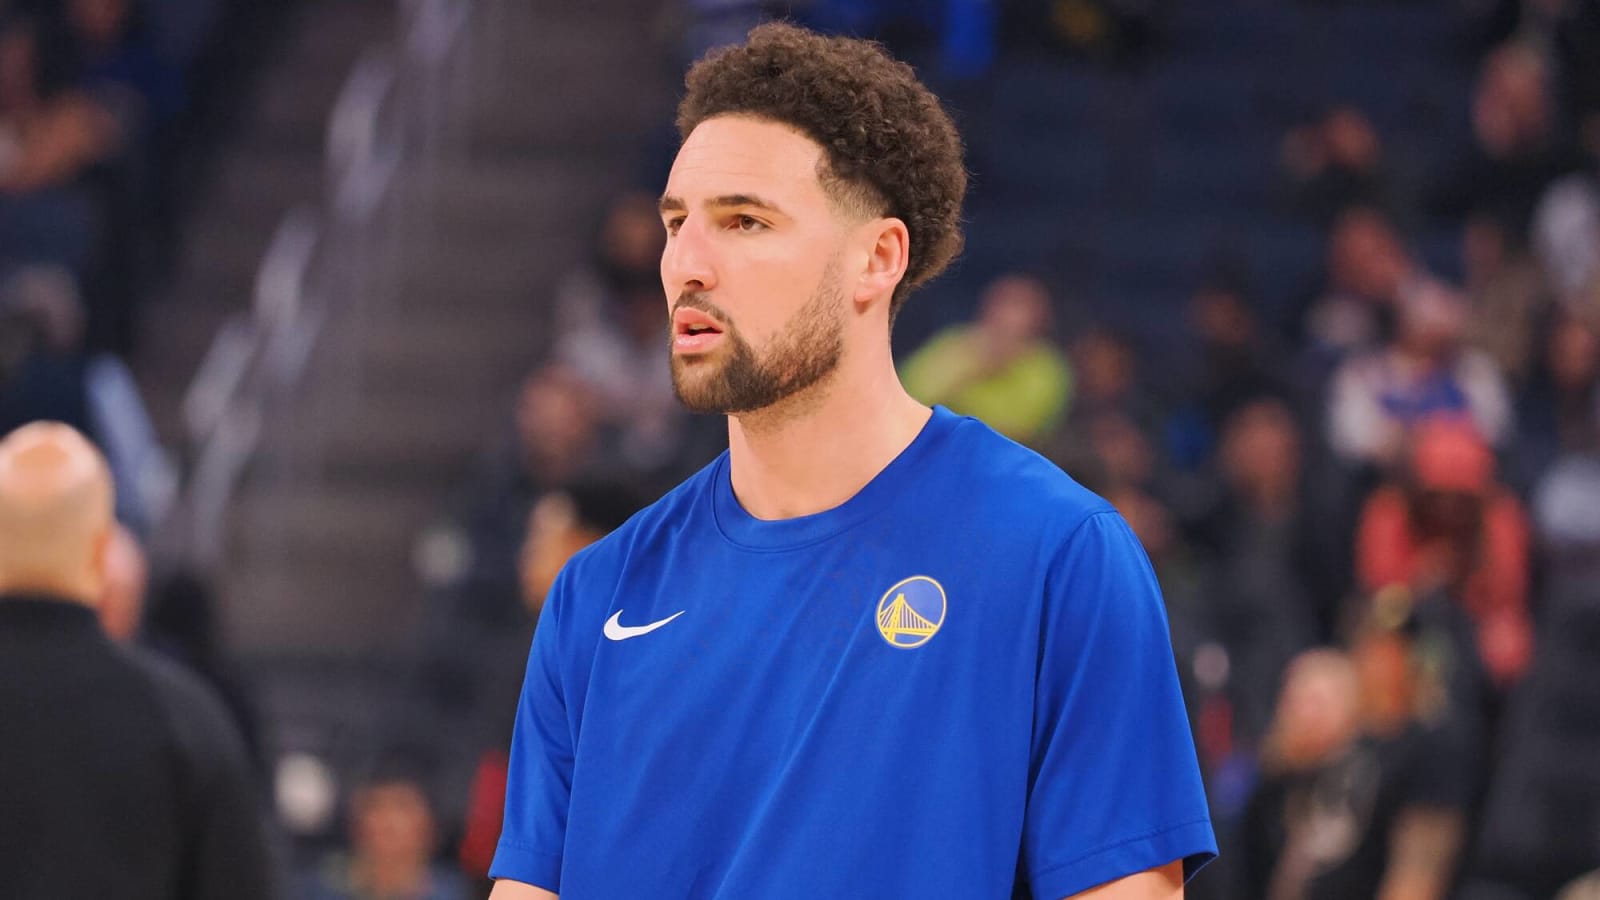 Gilbert Arenas Takes Shots At Klay Thompson For Not Improving His Game